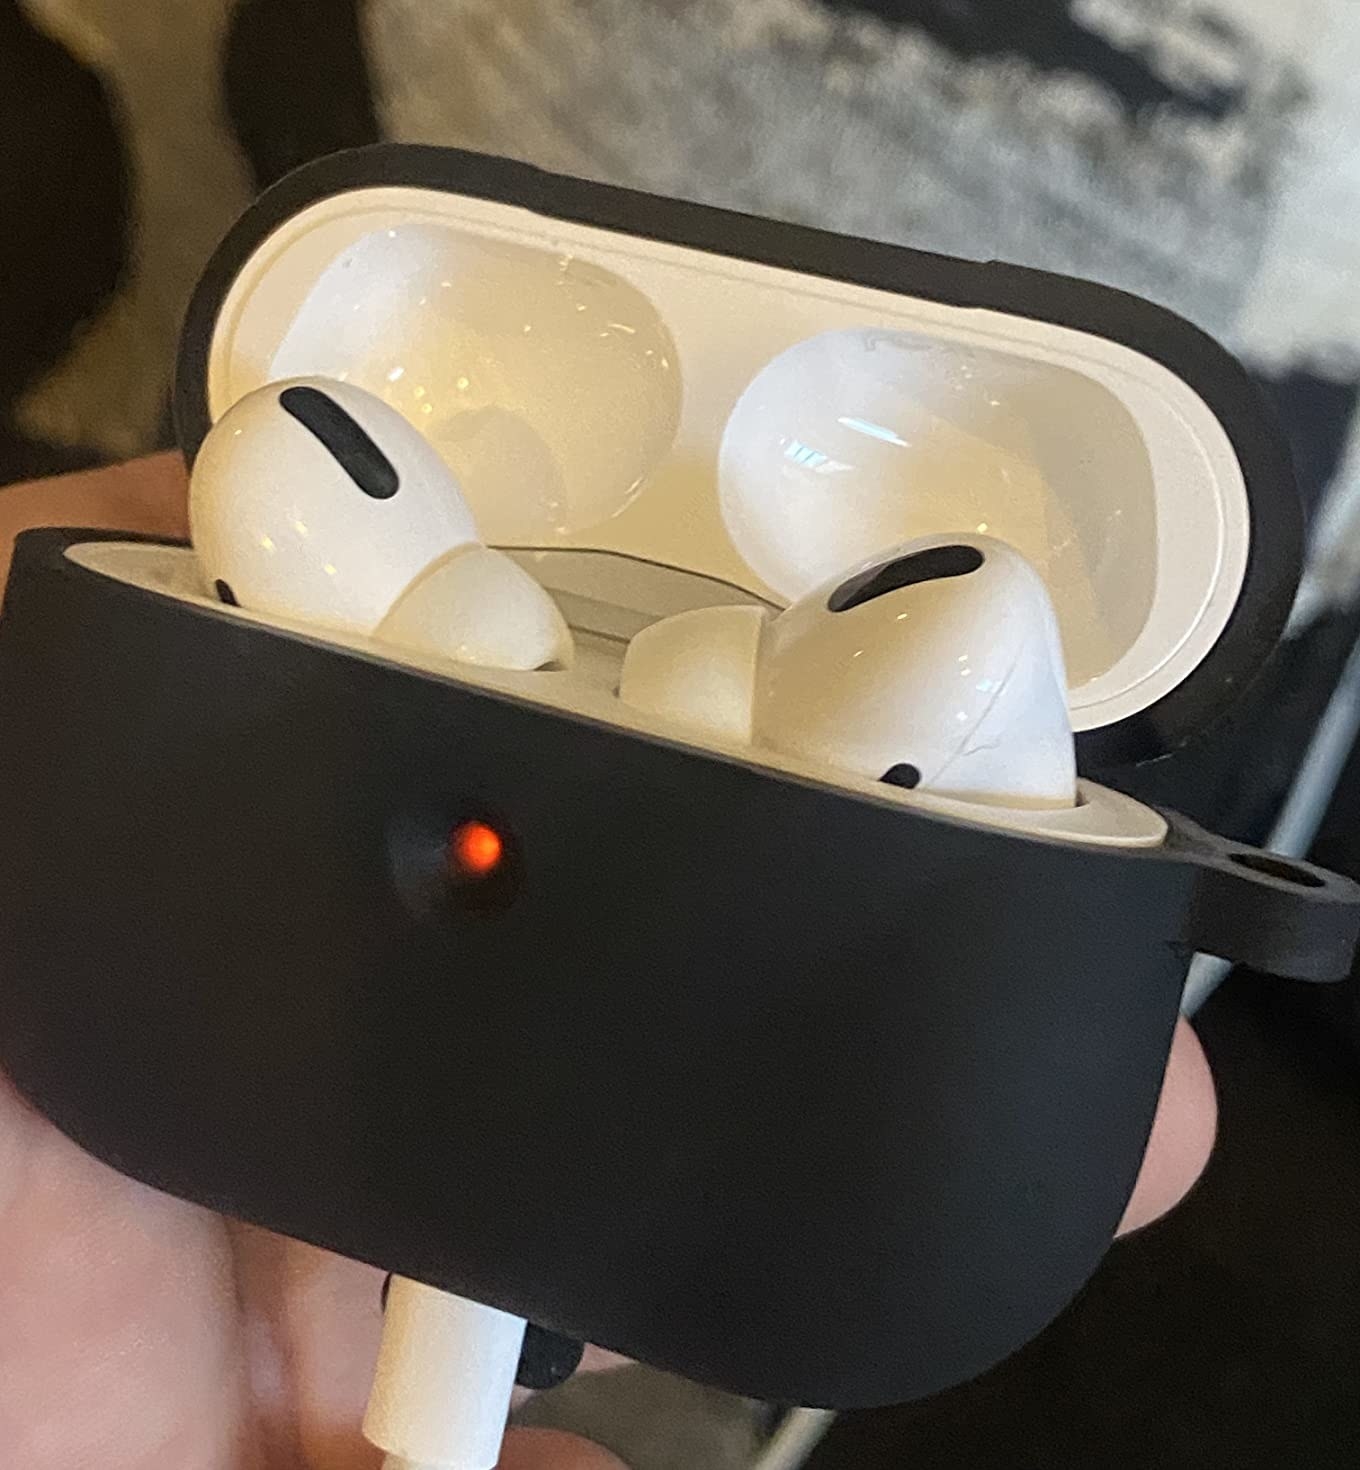 The Airpods in a holder